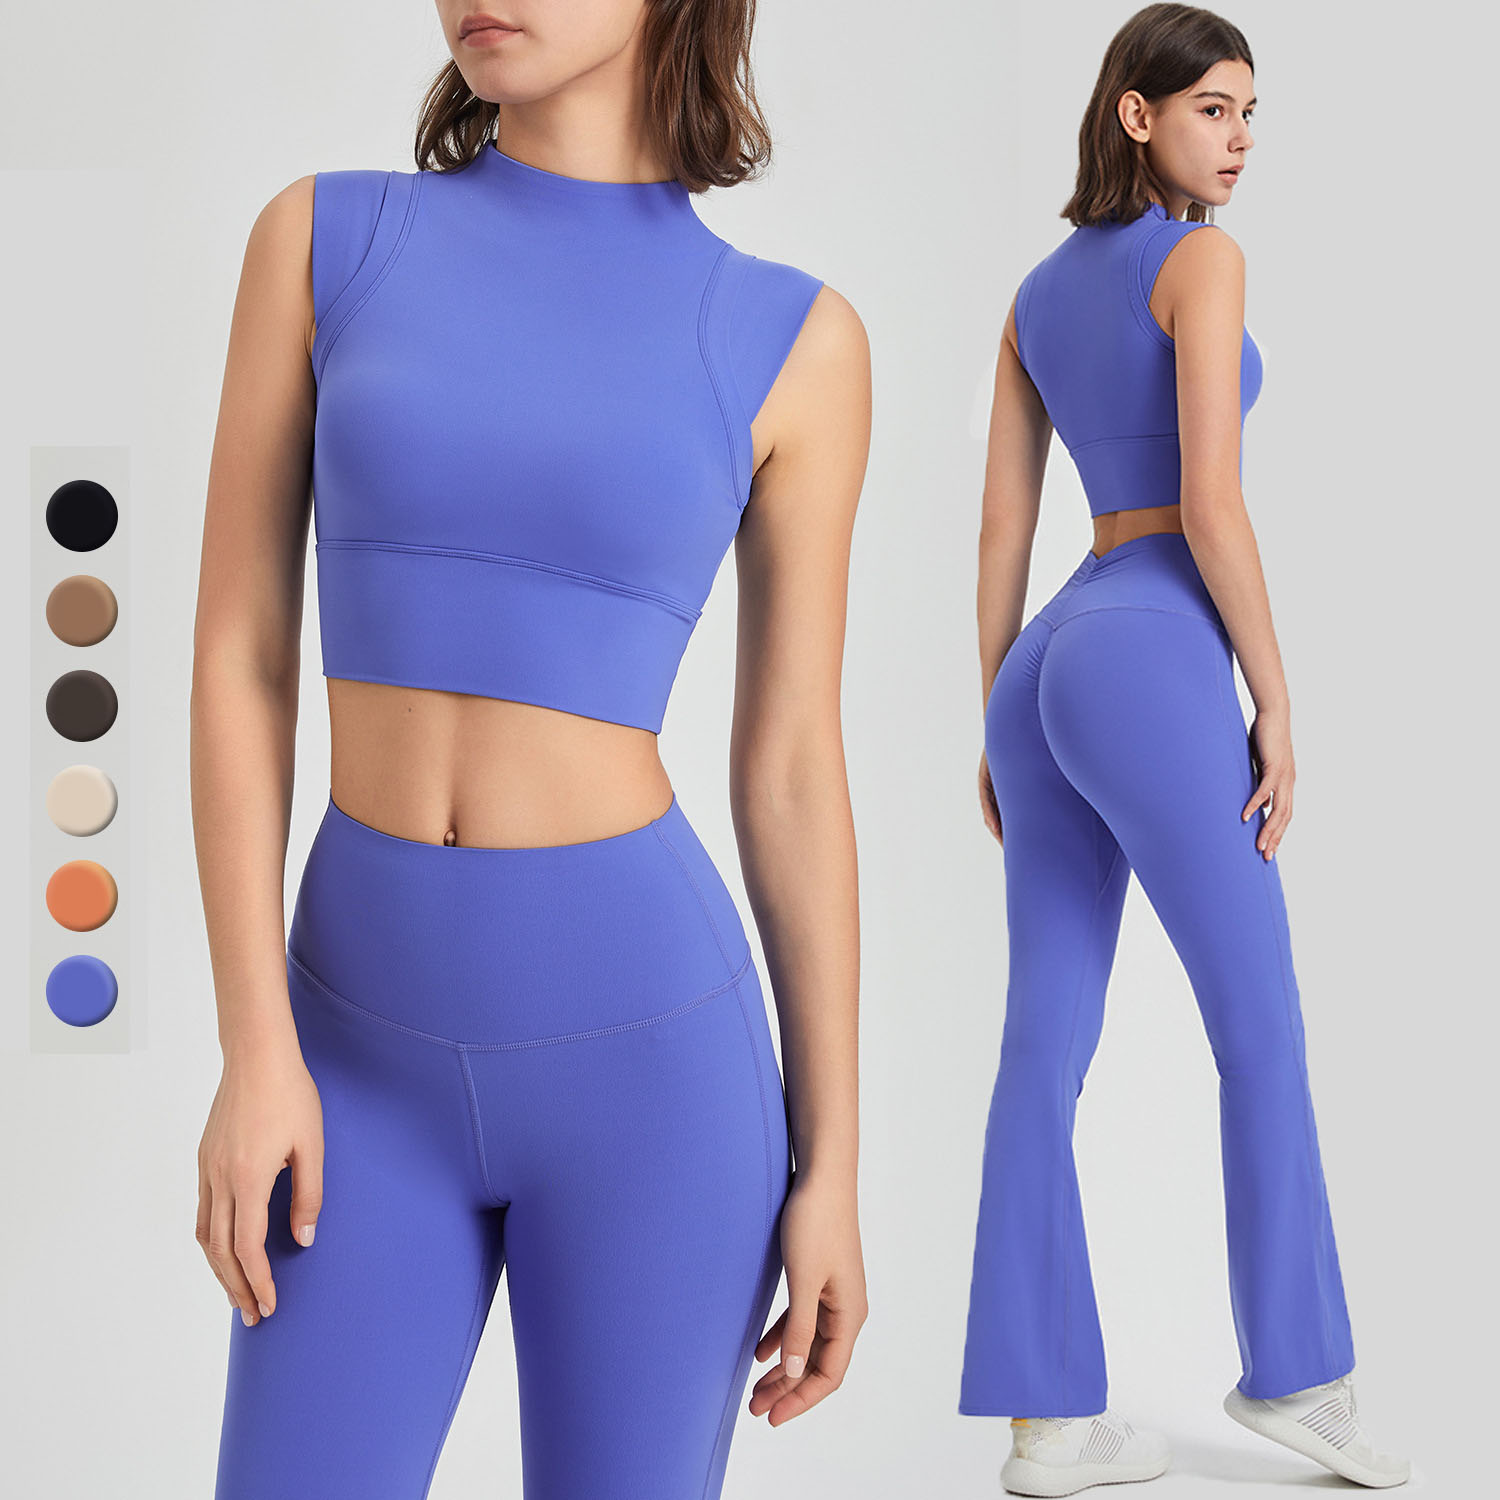 Yoga Set High Waist Flared Pants Solid Color Tank Top Workout Wear